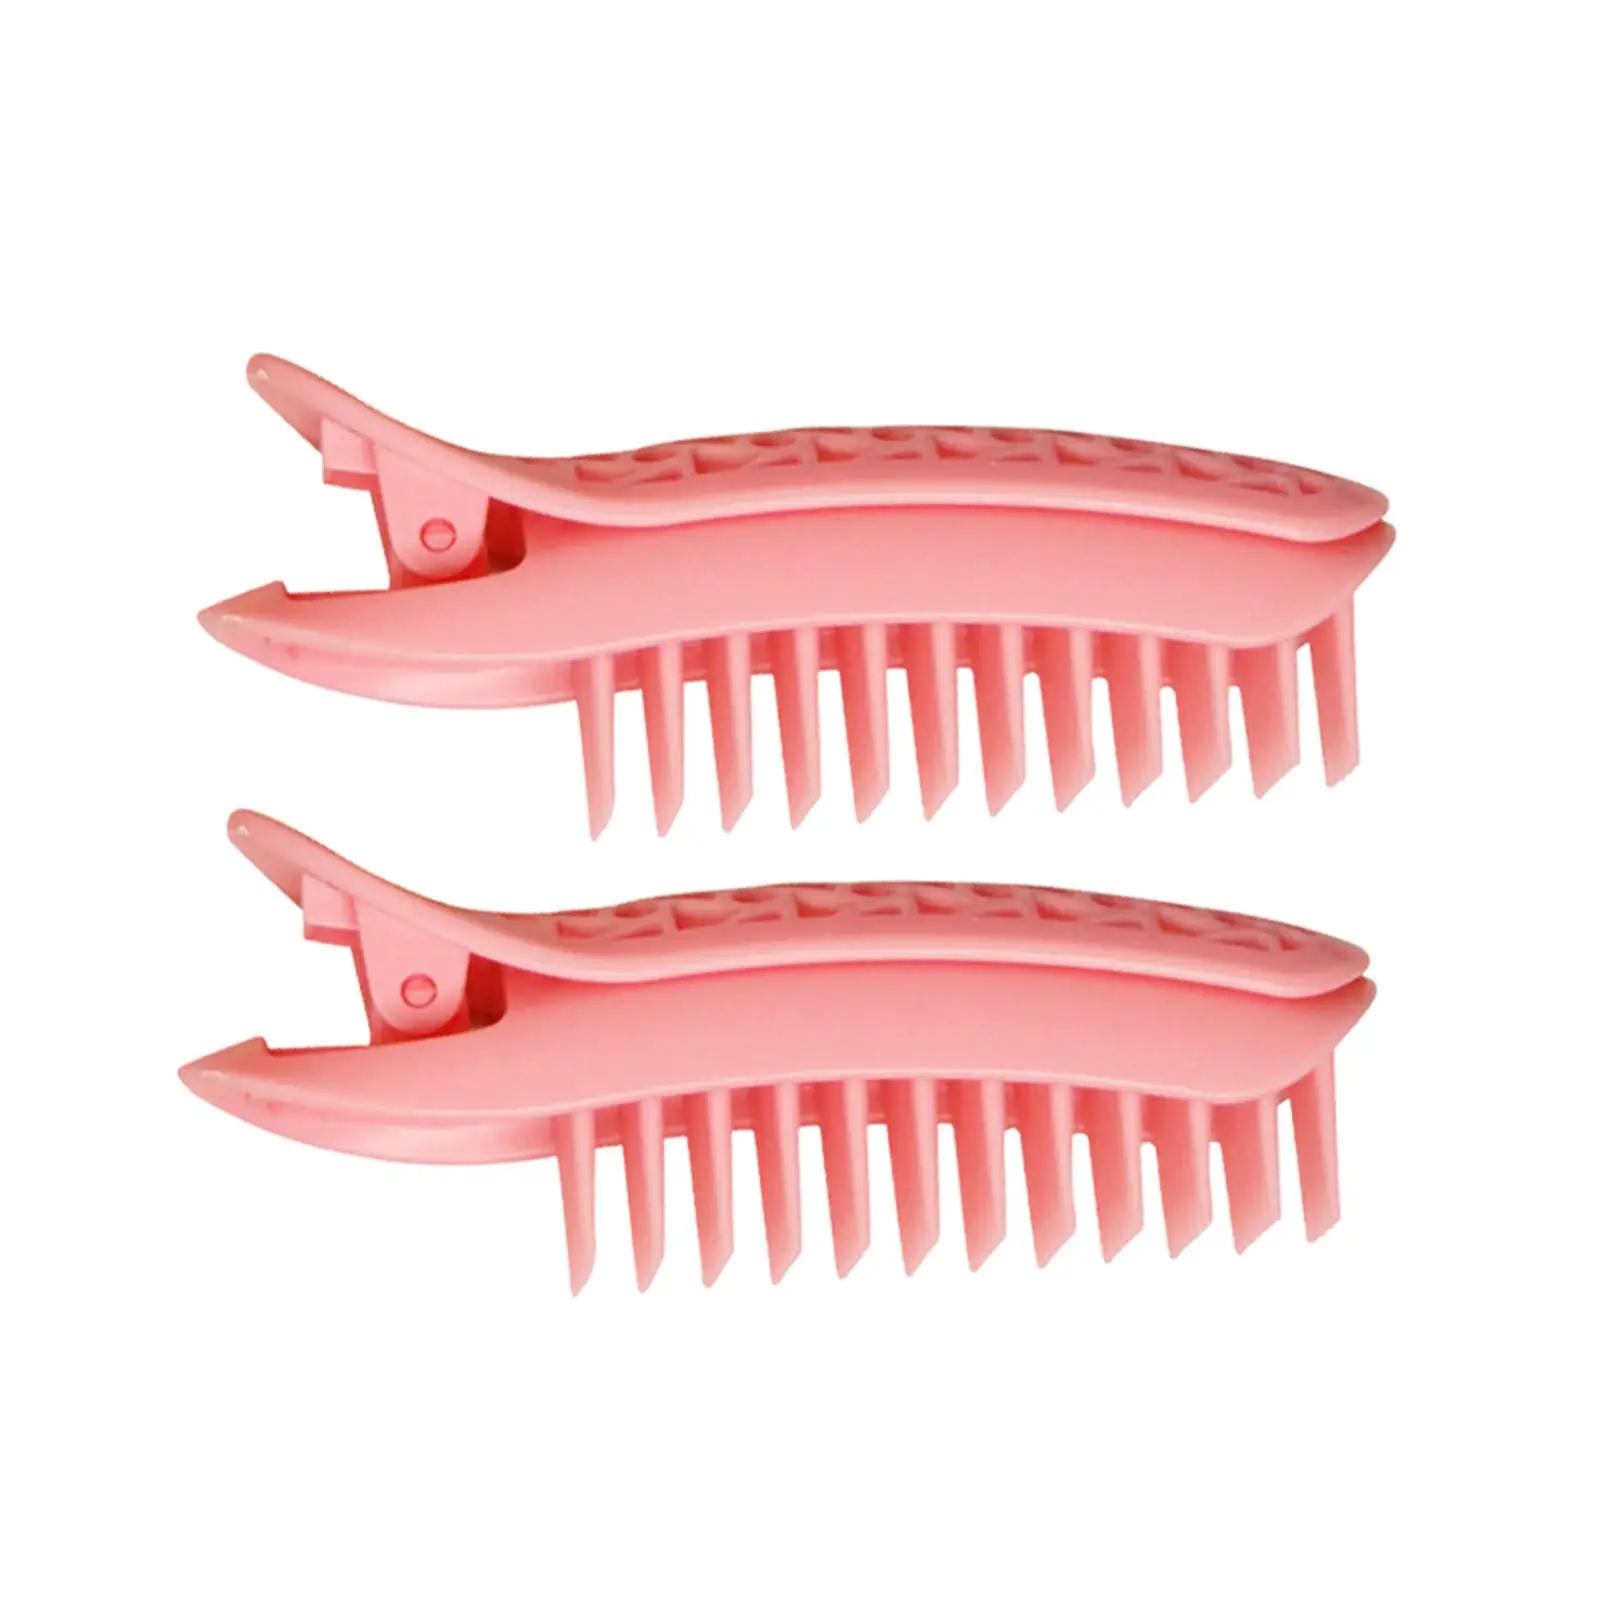 2 Pieces Sleeping Volumizing Hair Roots Clip Lazy Bangs Fixed Clips Shaping Durable Shaggy Curling Clamps for Long Short Hair